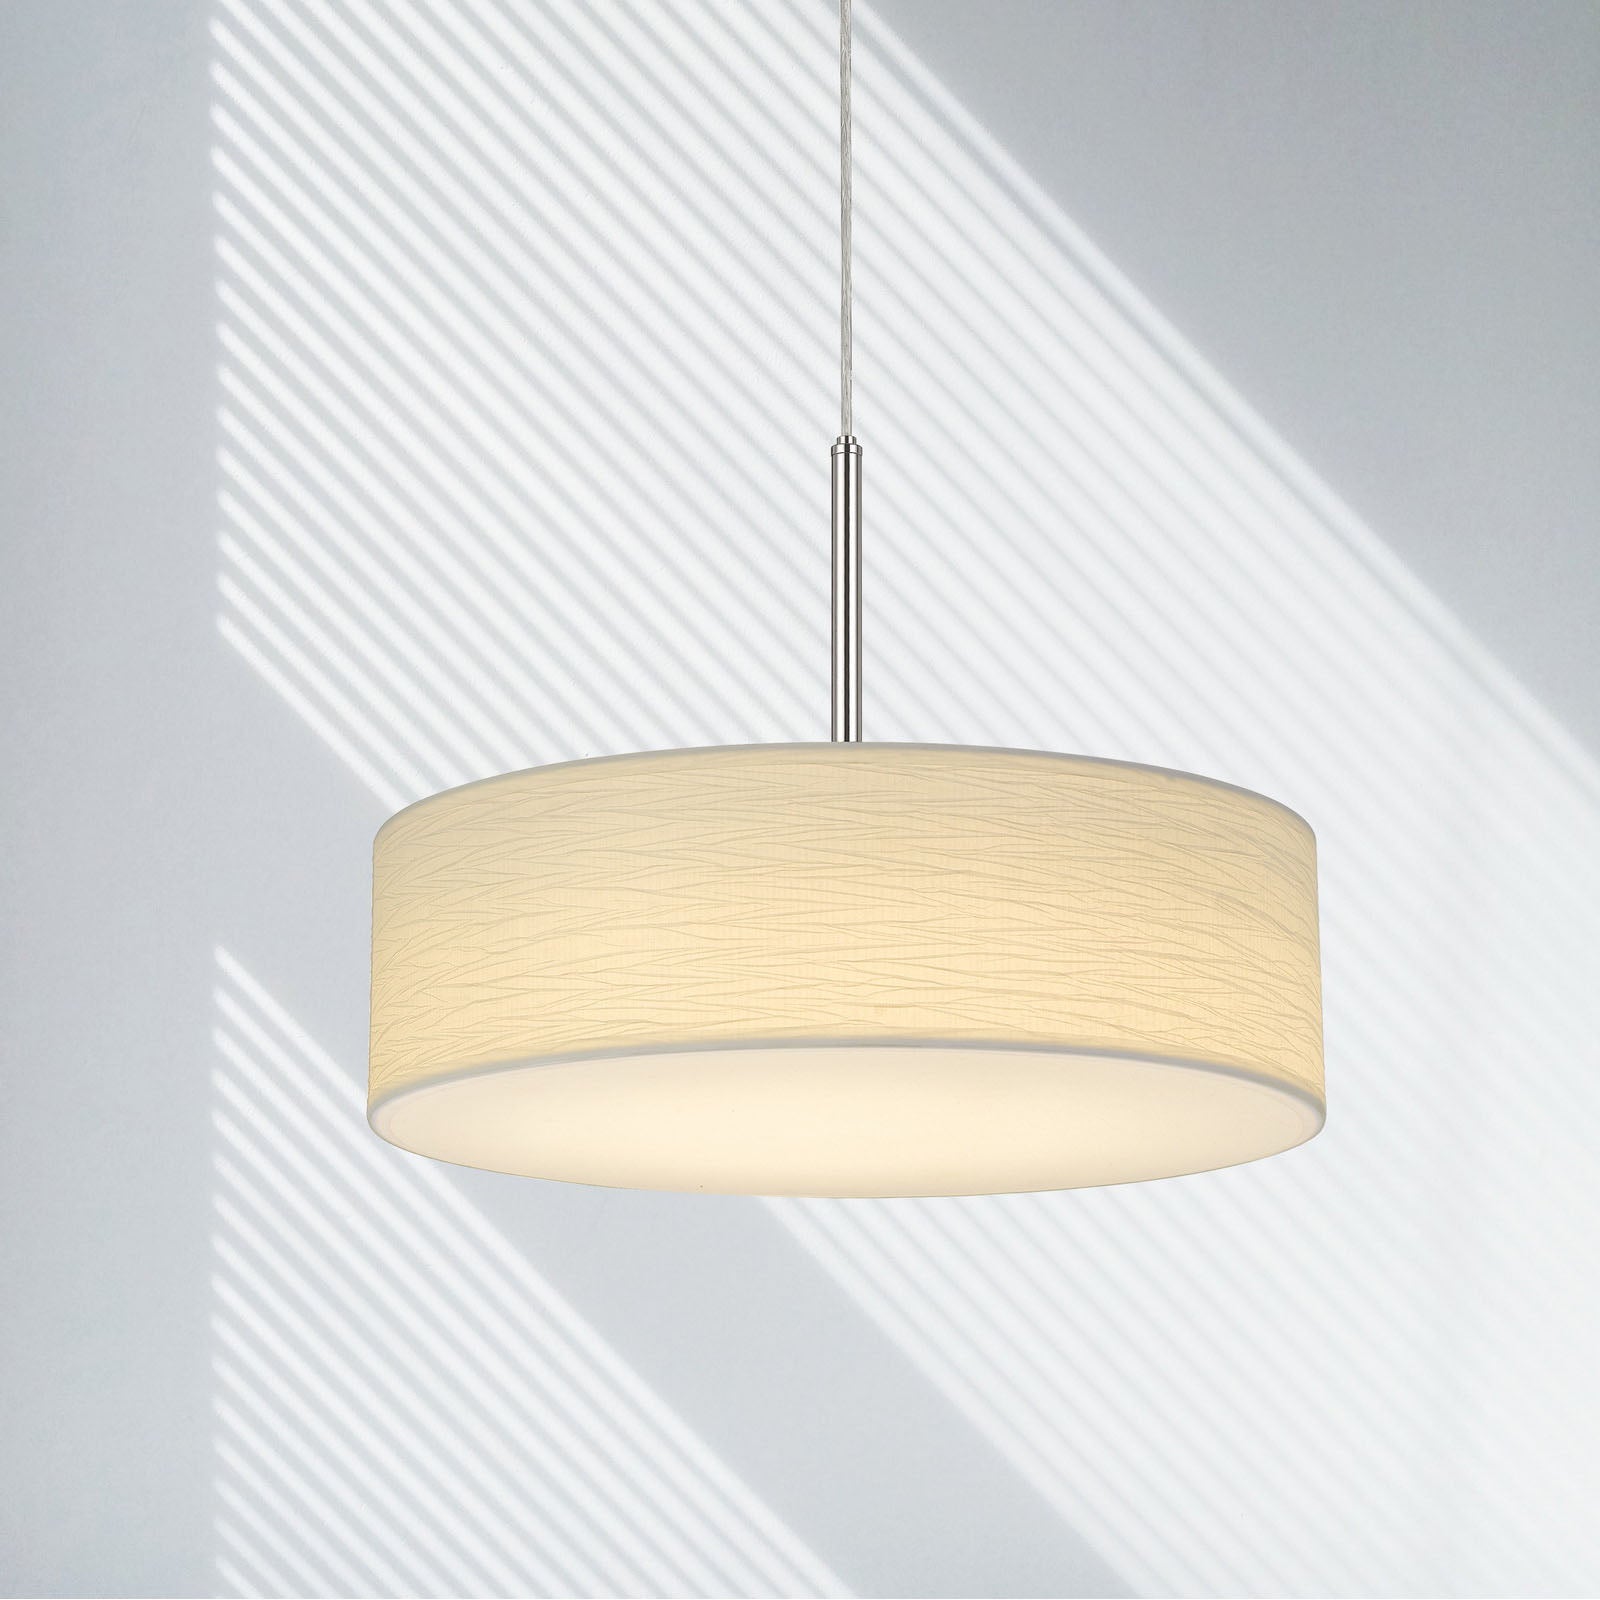 Cal Lighting Led 18W Dimmable Pendant With Diffuser And Hardback Fabric Shade 